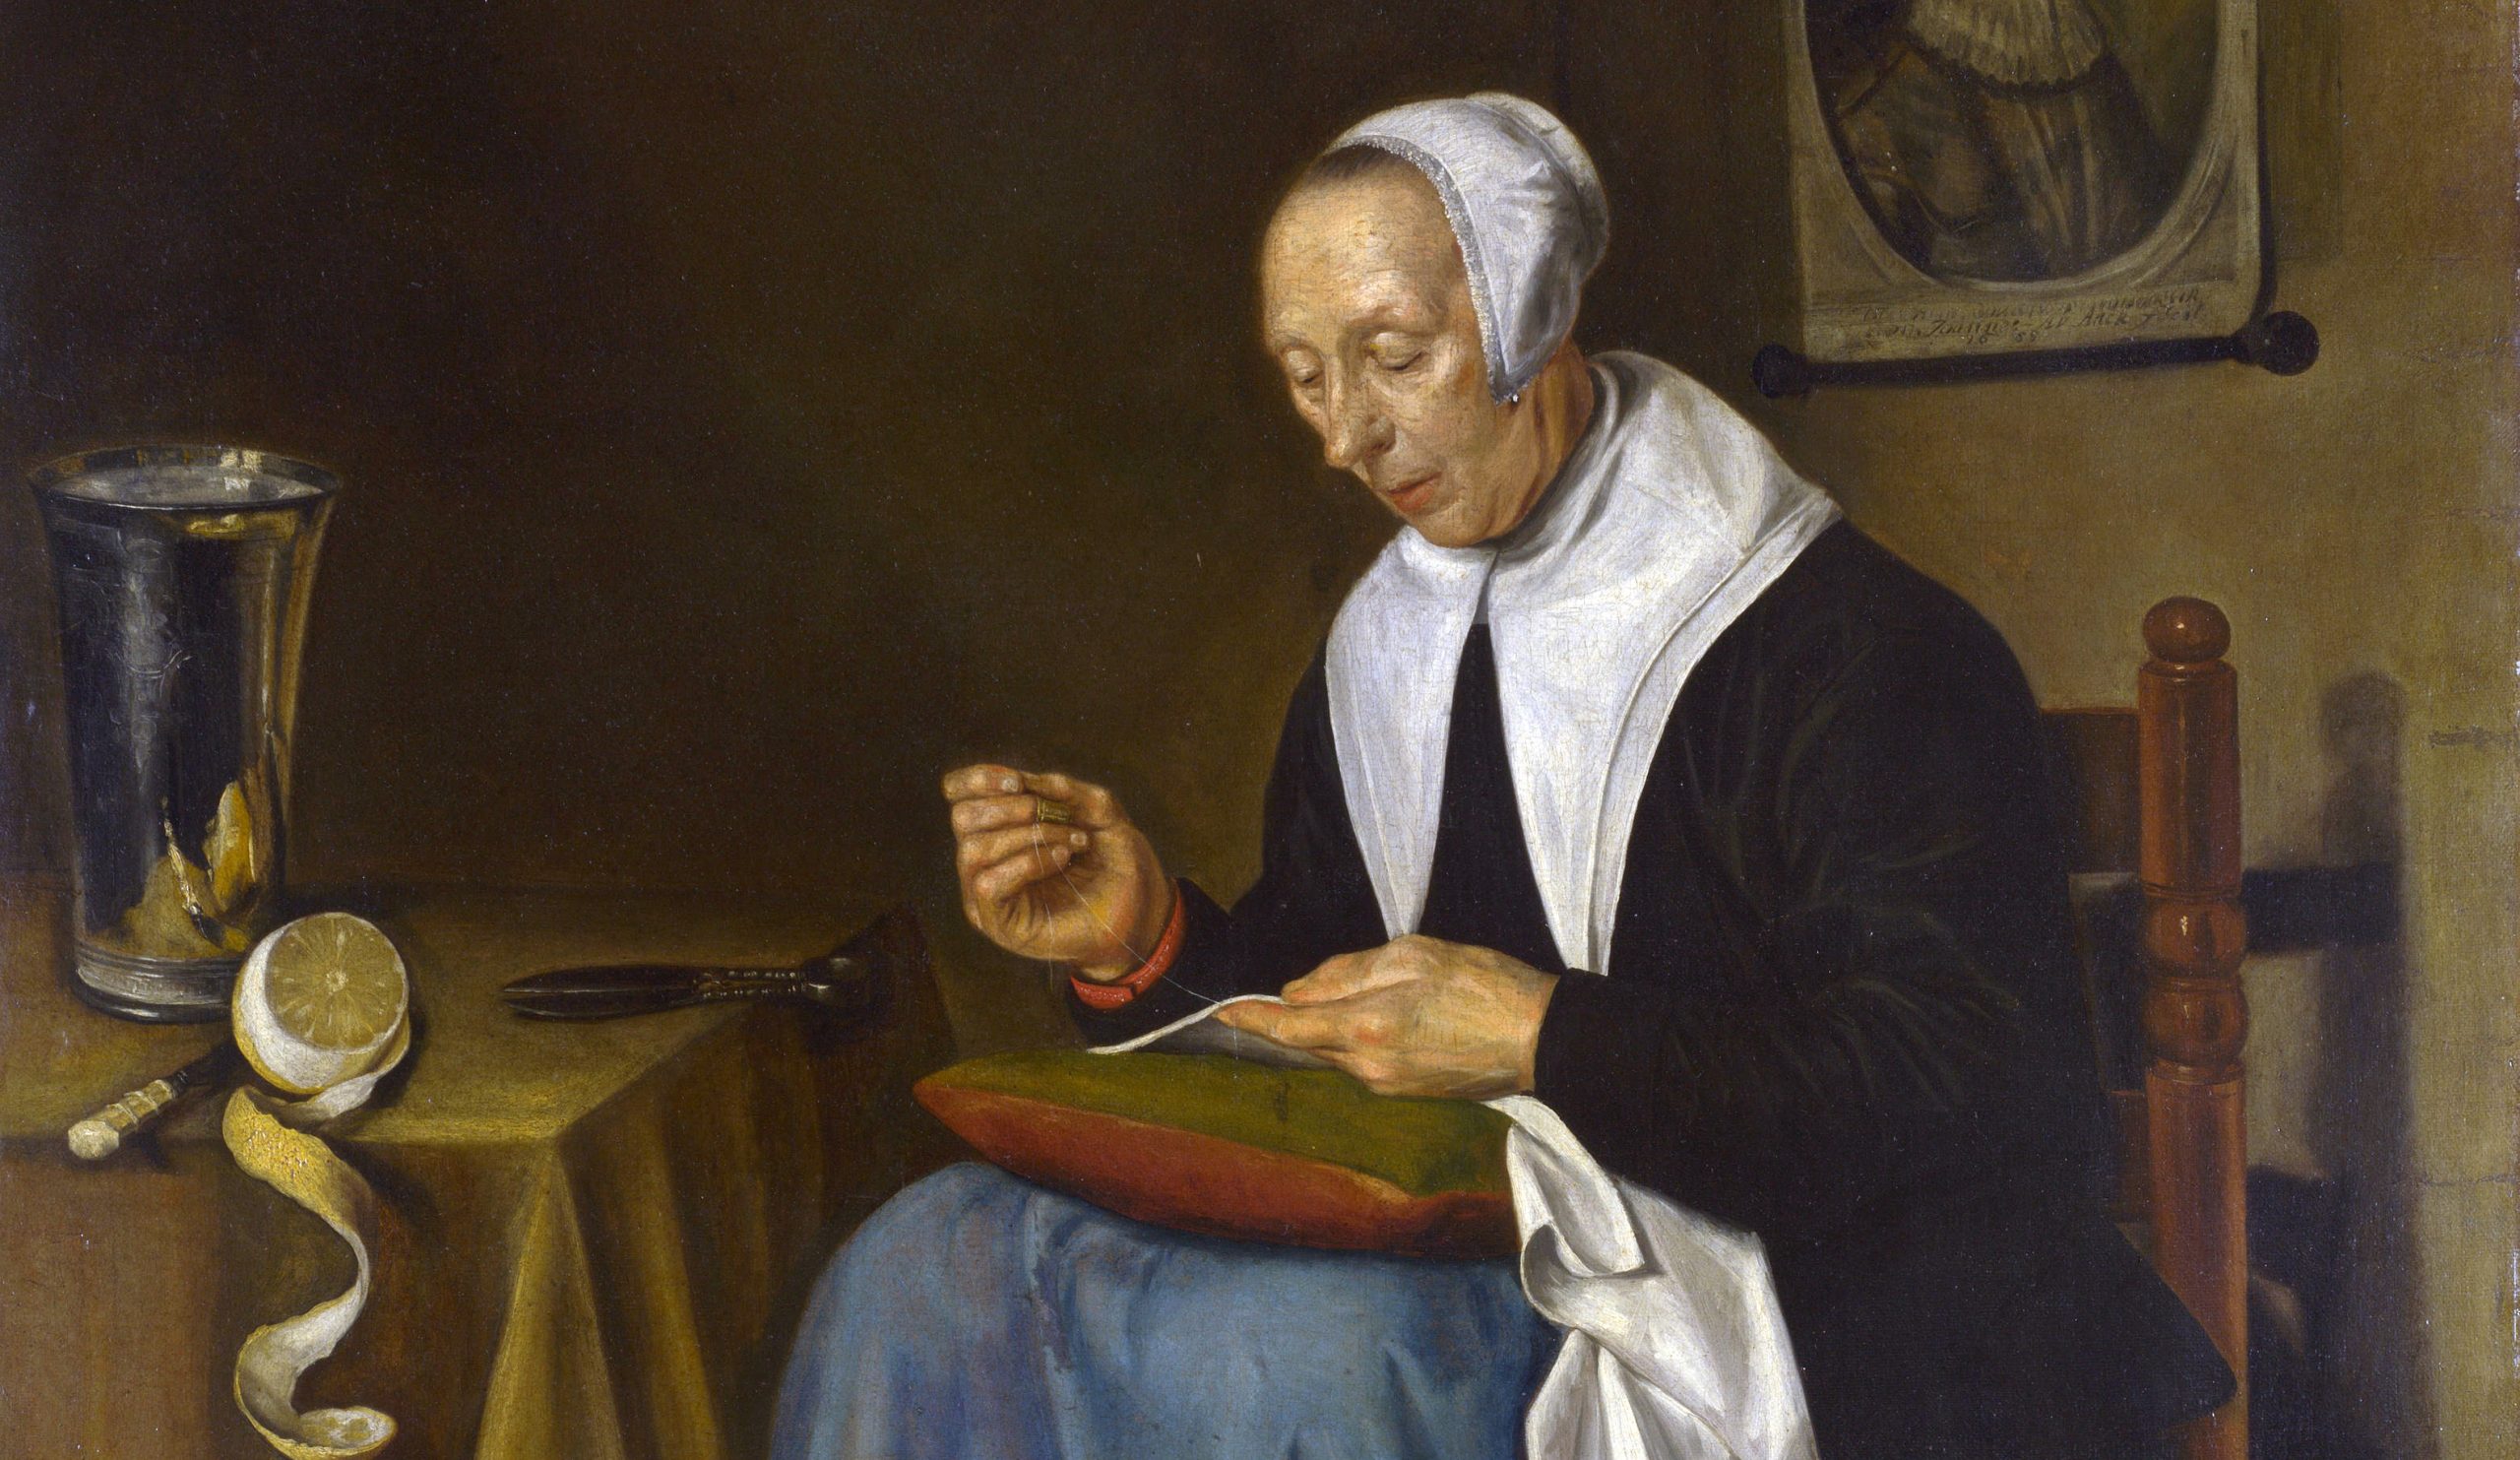 Johannes van der Aeck: An Old Woman seated sewing